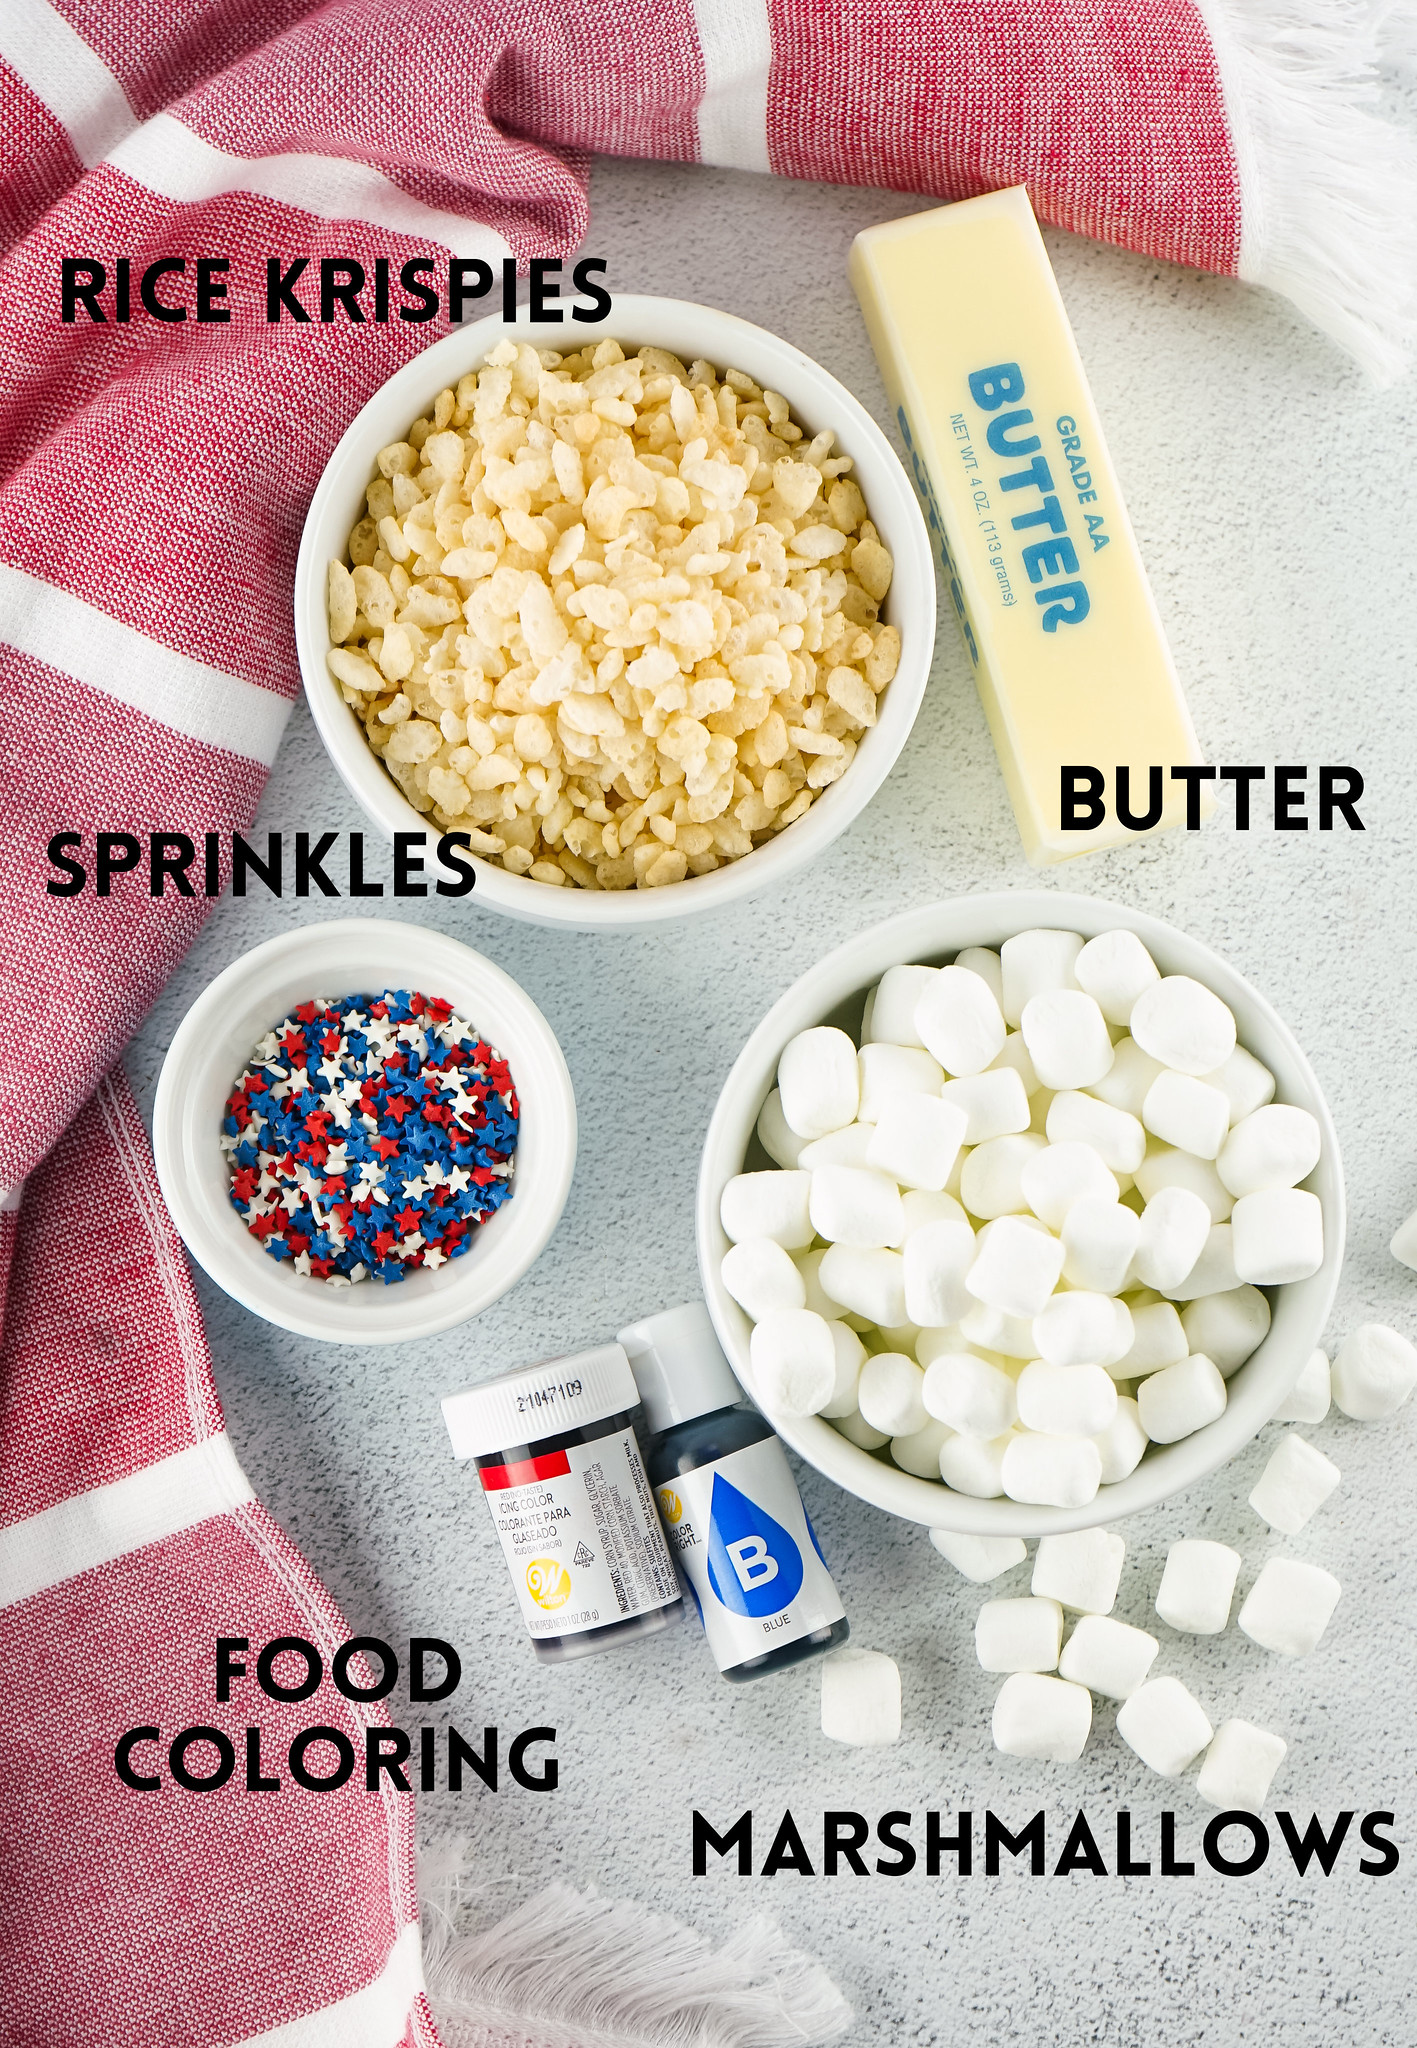 Ingredients for 4th of July Rice Krispies Treats